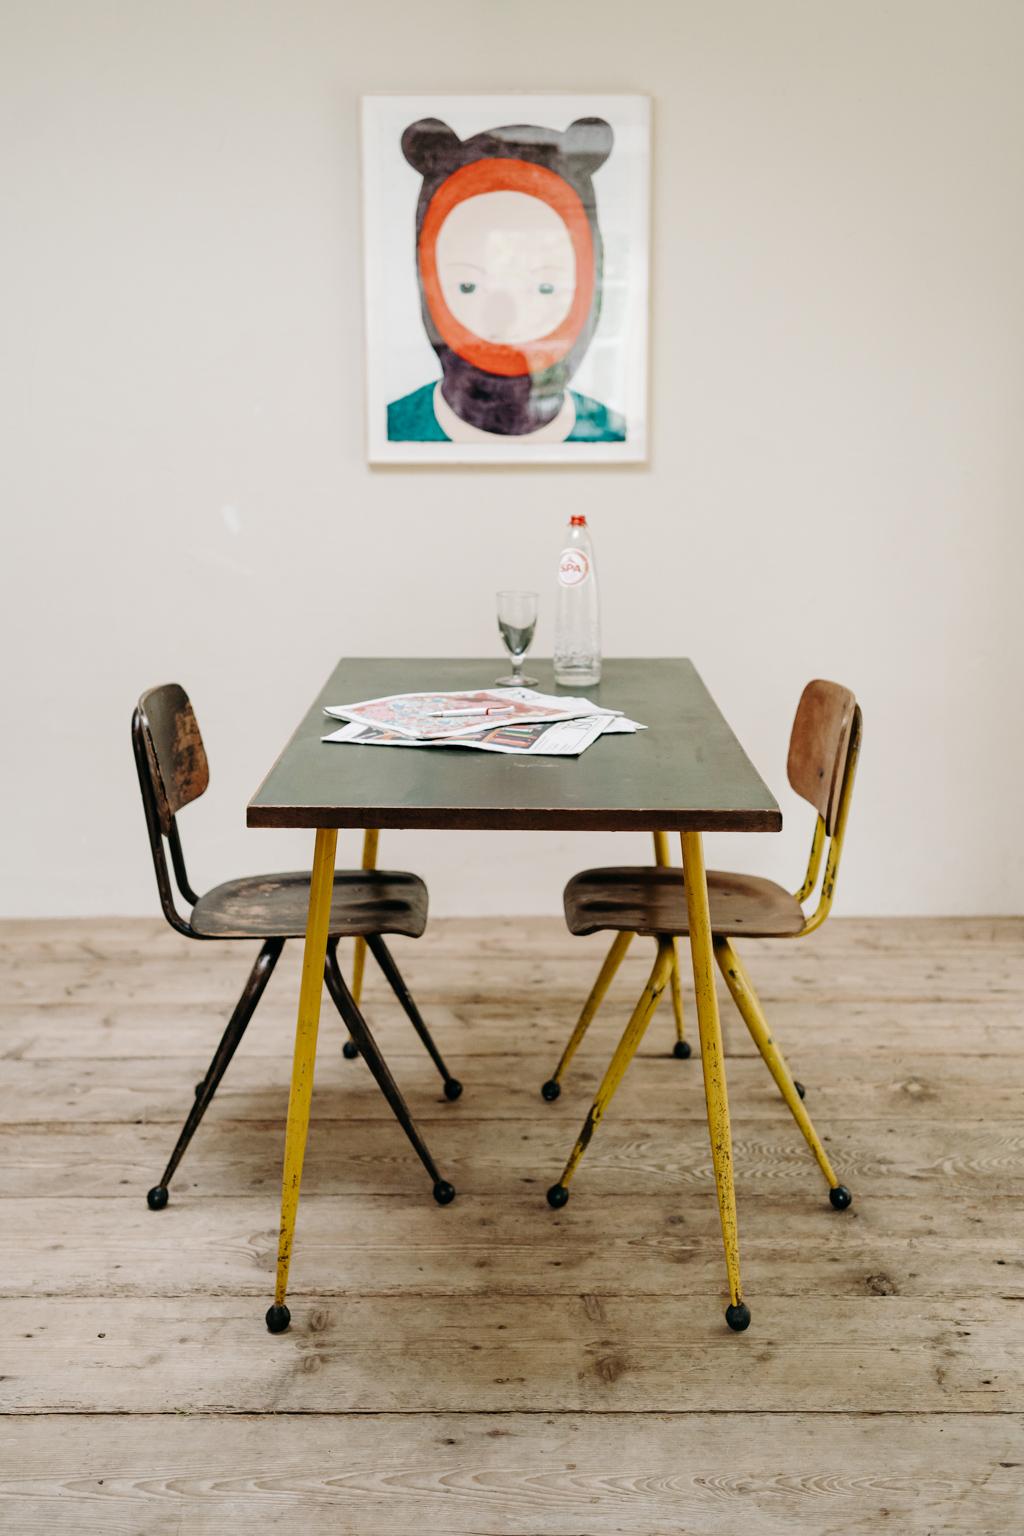 this table and two chairs are by David Chapman, 1909-1978, US architect and Industrial designer
Measures: table 130 cm x 70 cm x 78 cm high
chairs 50 cm deep x 82/45 cm high and 48 cm wide.